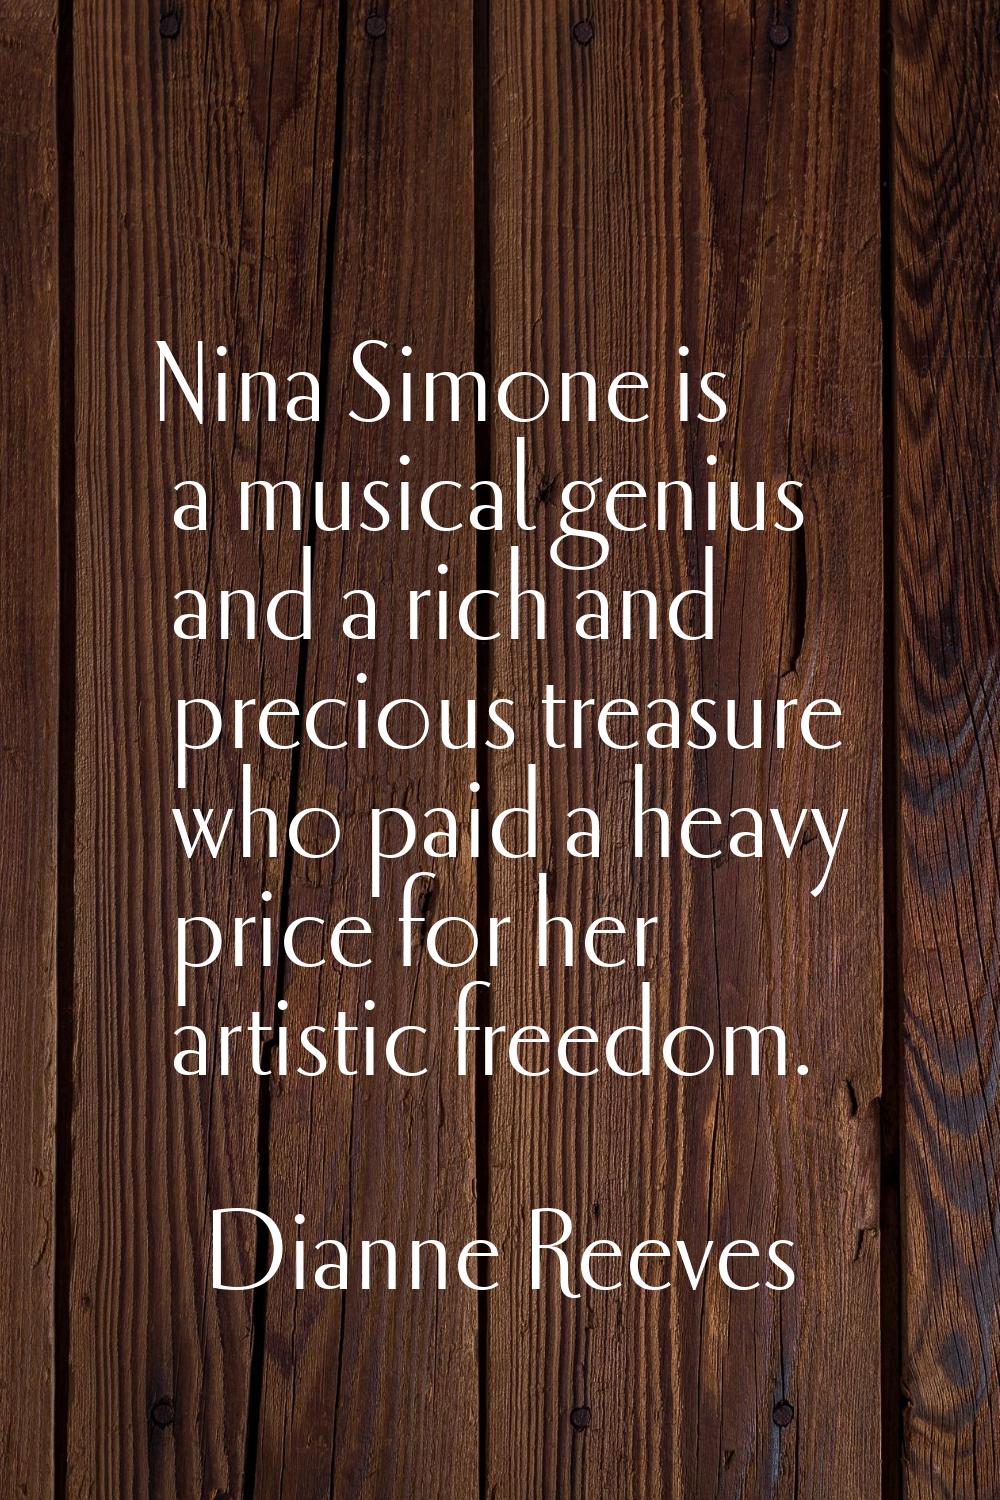 Nina Simone is a musical genius and a rich and precious treasure who paid a heavy price for her art